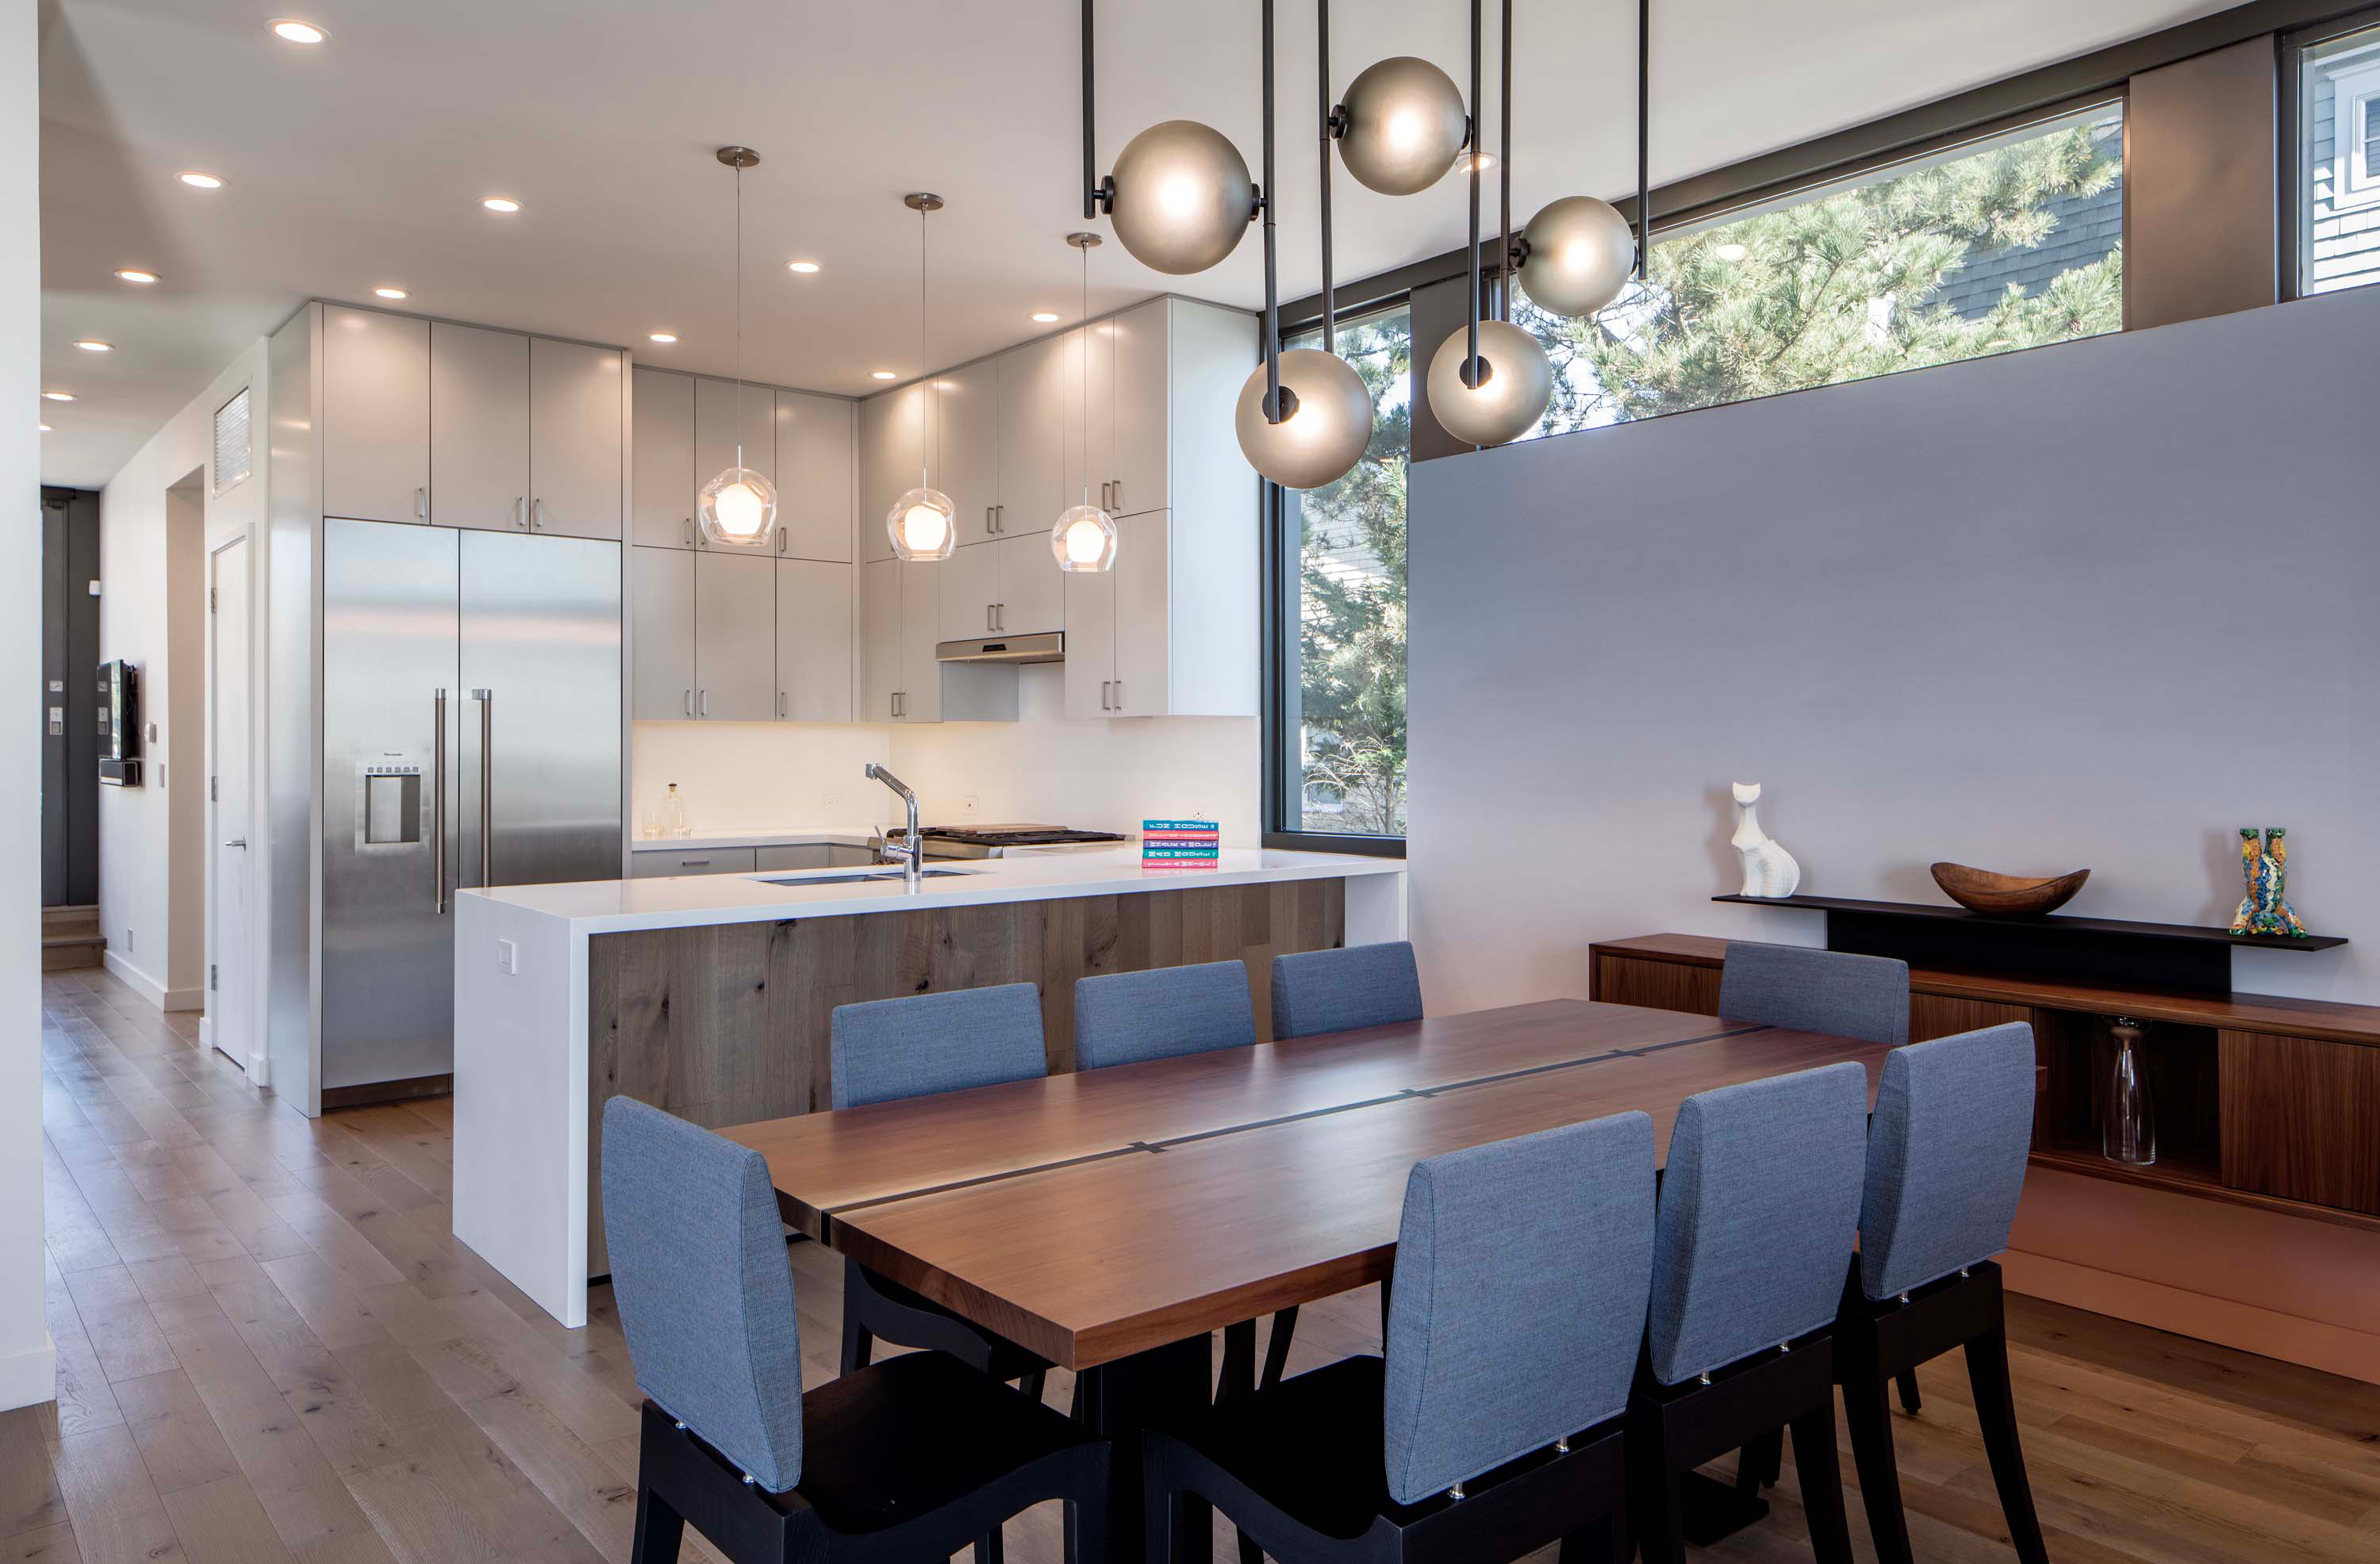 Interior photo of the Beach Haven Residence by Specht Novak Architects. Shot by Taggart Sorenson featuring dining room, island kitchen, and spherical lighting fixtures hanging from a tall ceiling.